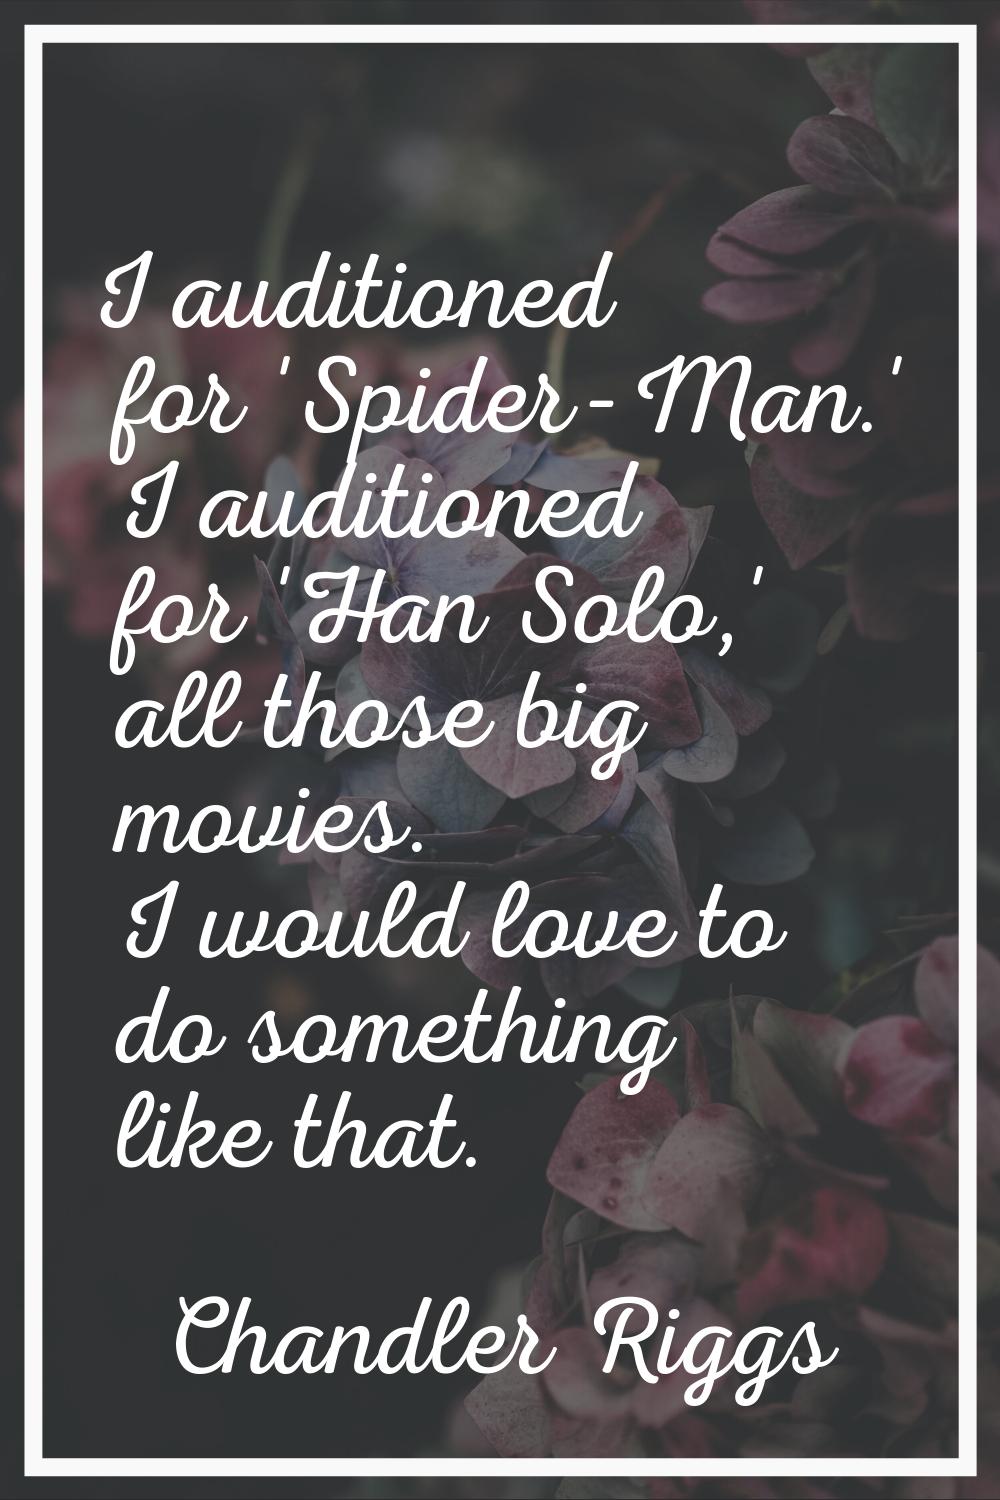 I auditioned for 'Spider-Man.' I auditioned for 'Han Solo,' all those big movies. I would love to d